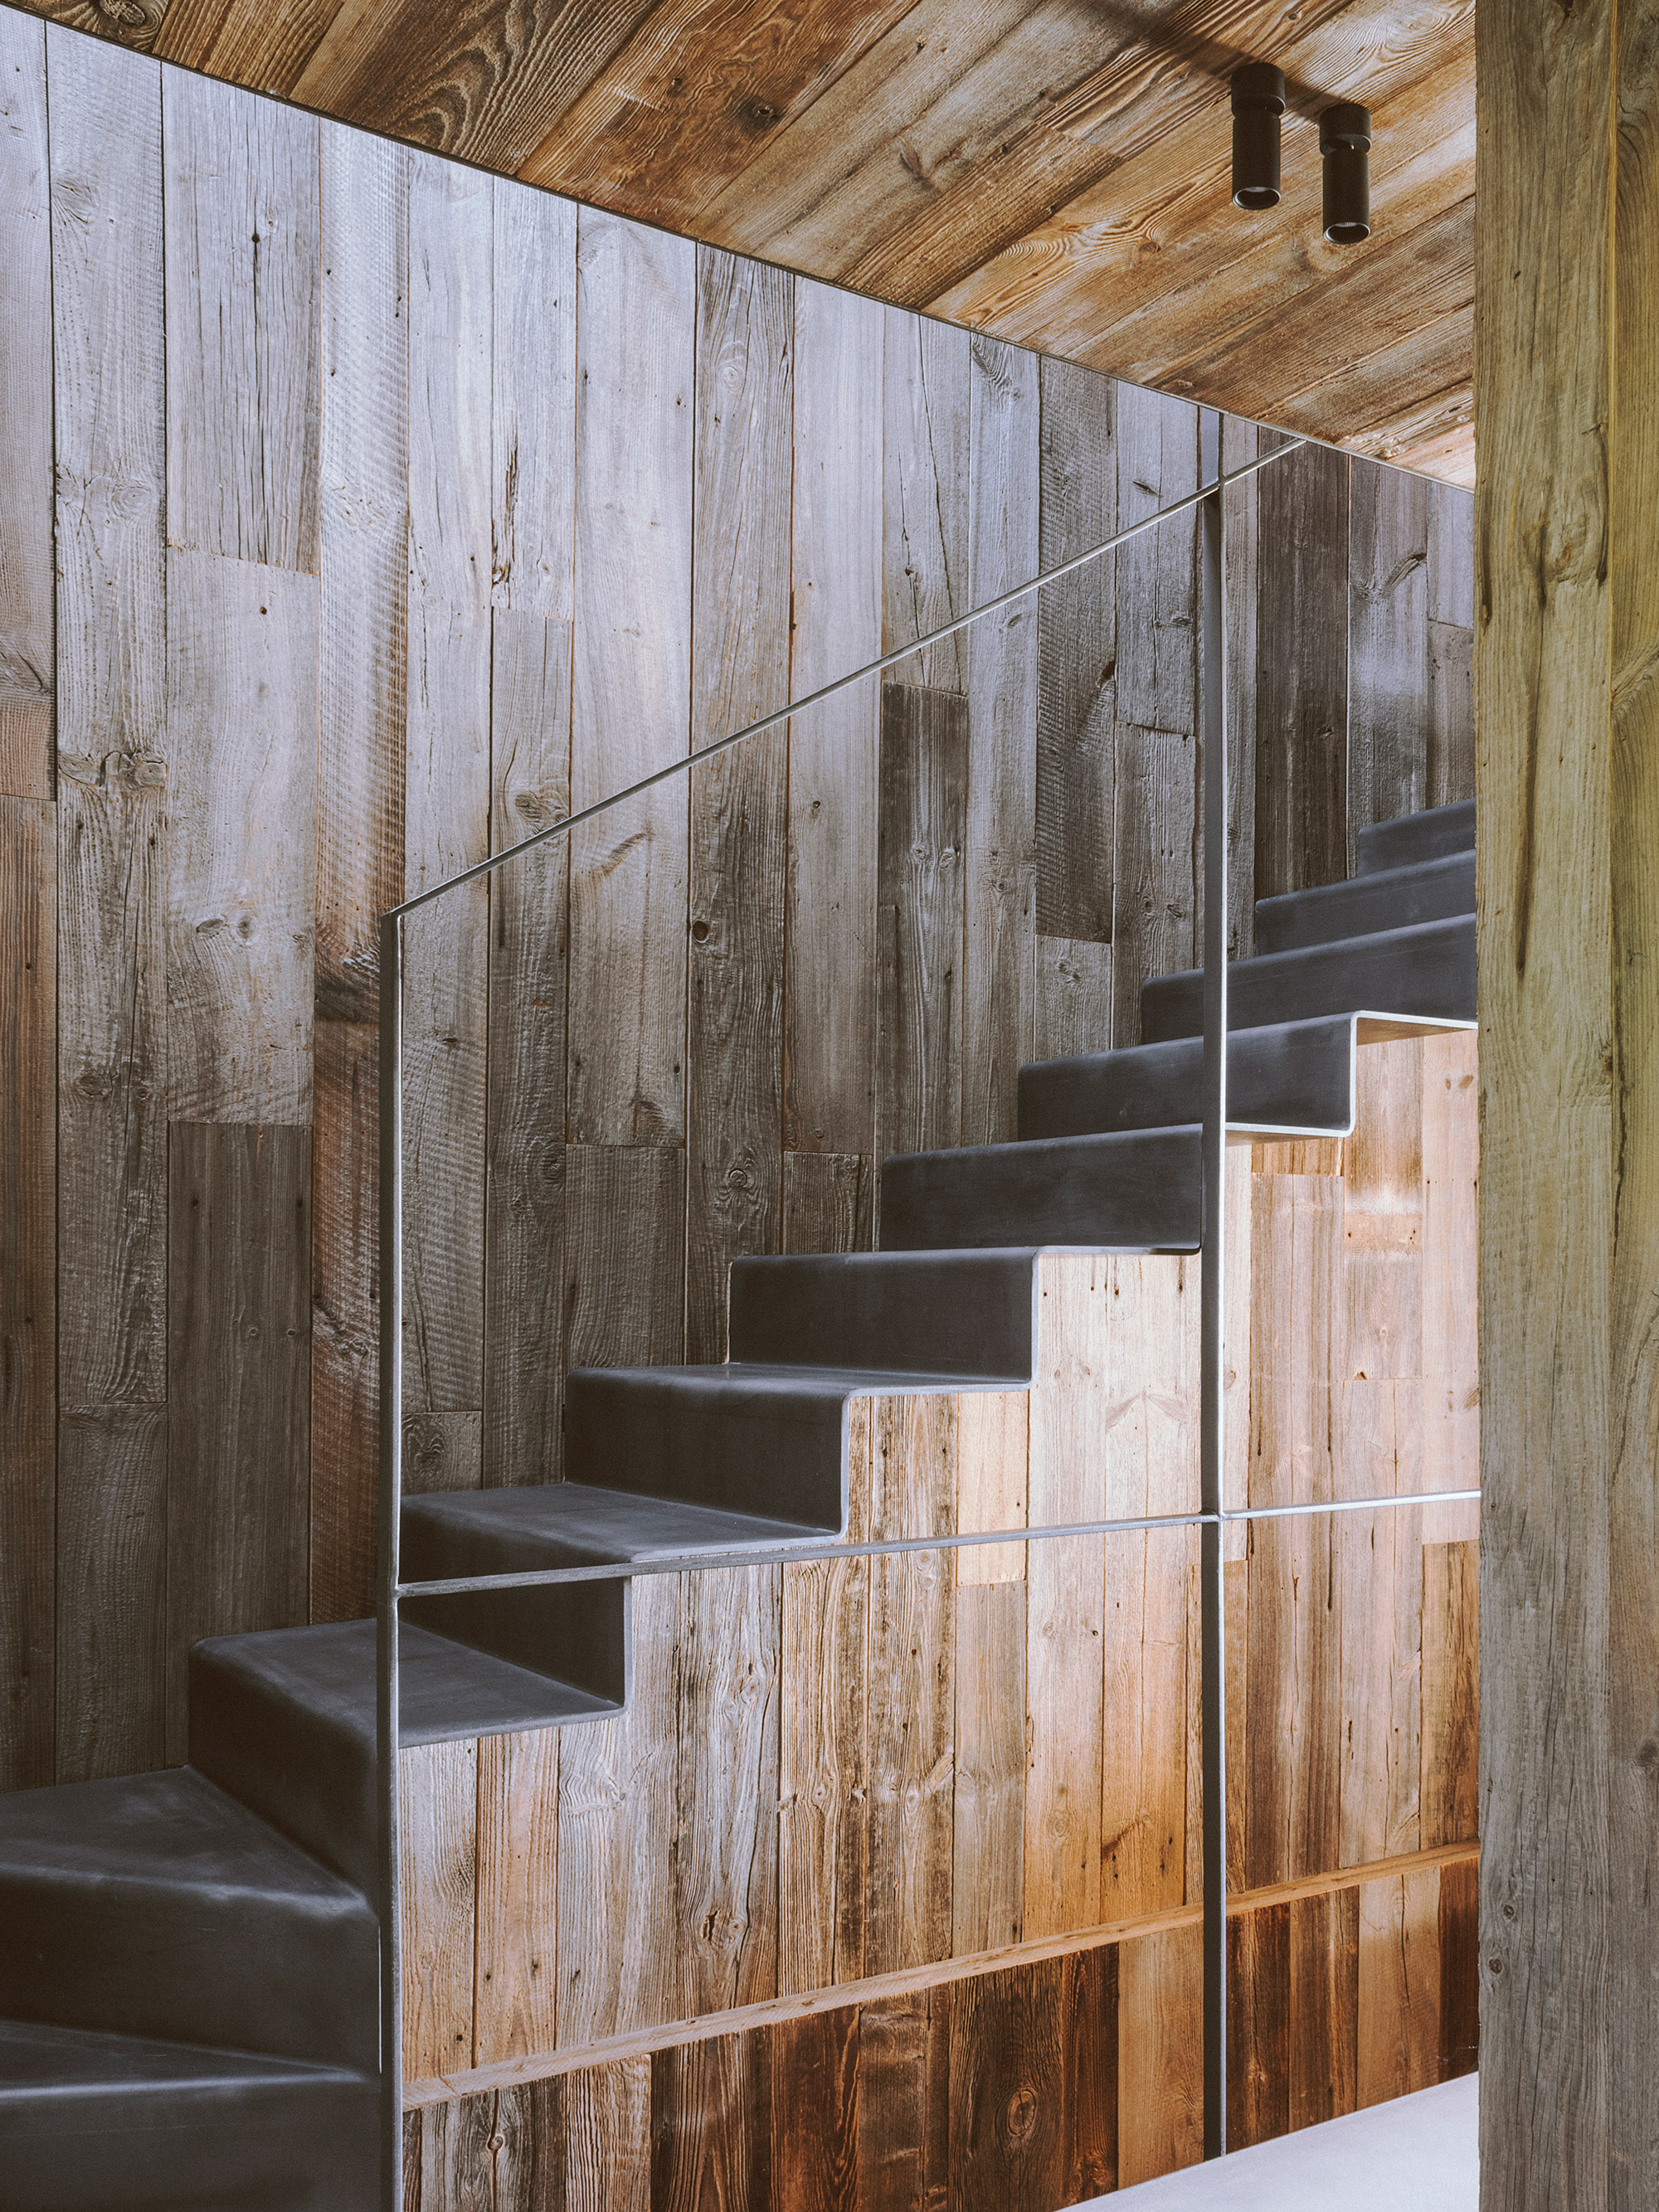 Rustic alpine chalet, stainless steel staircase